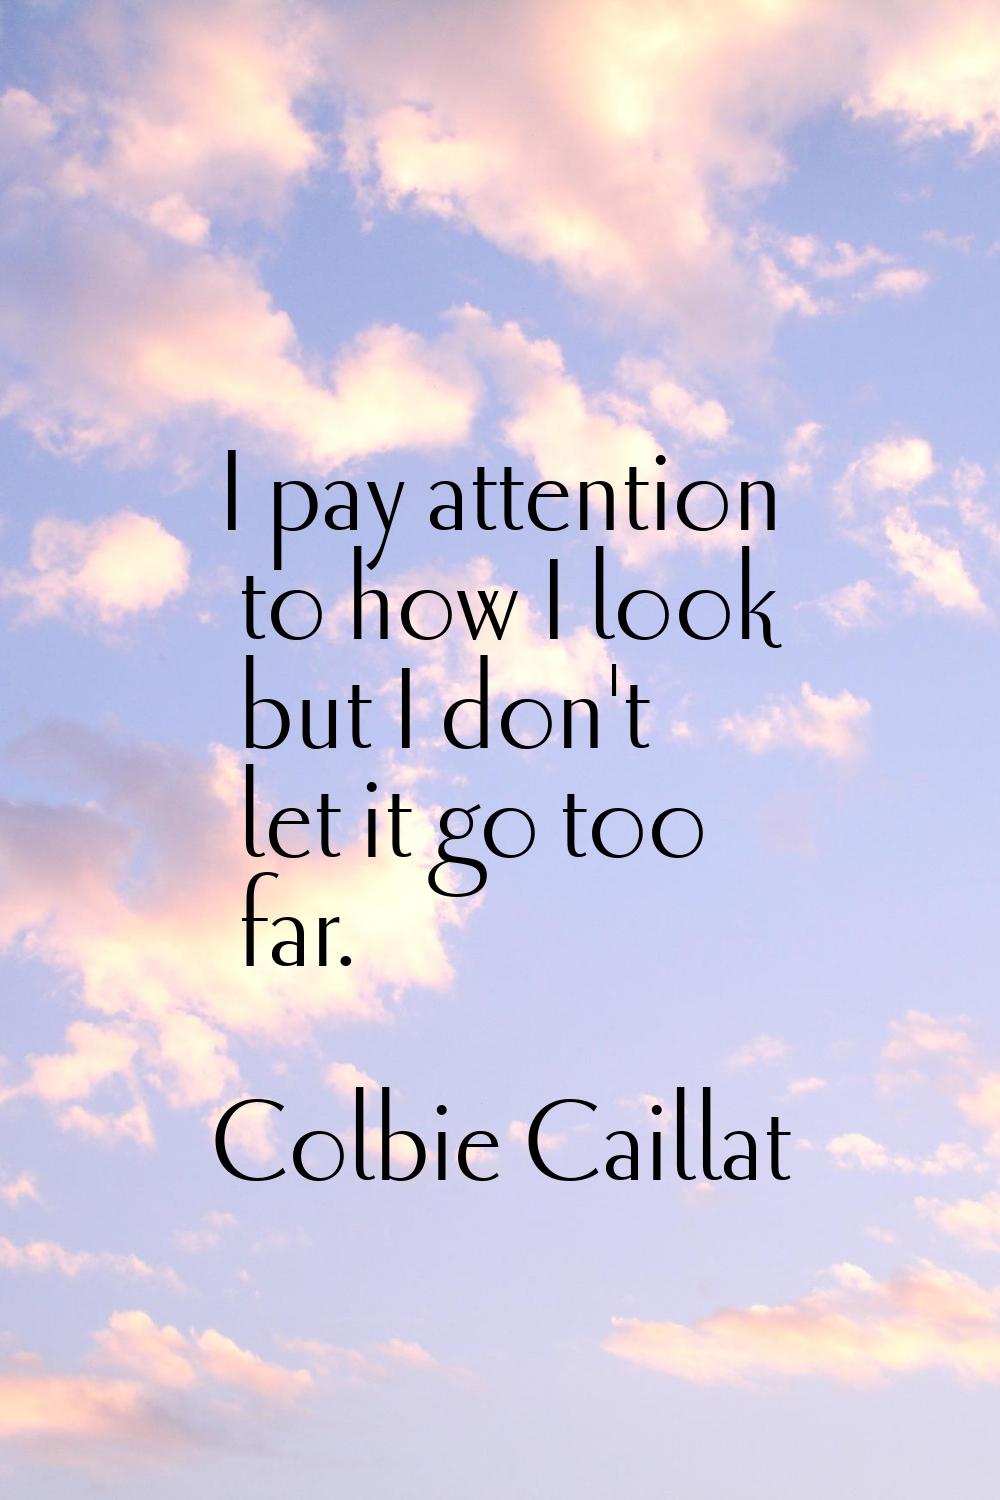 I pay attention to how I look but I don't let it go too far.